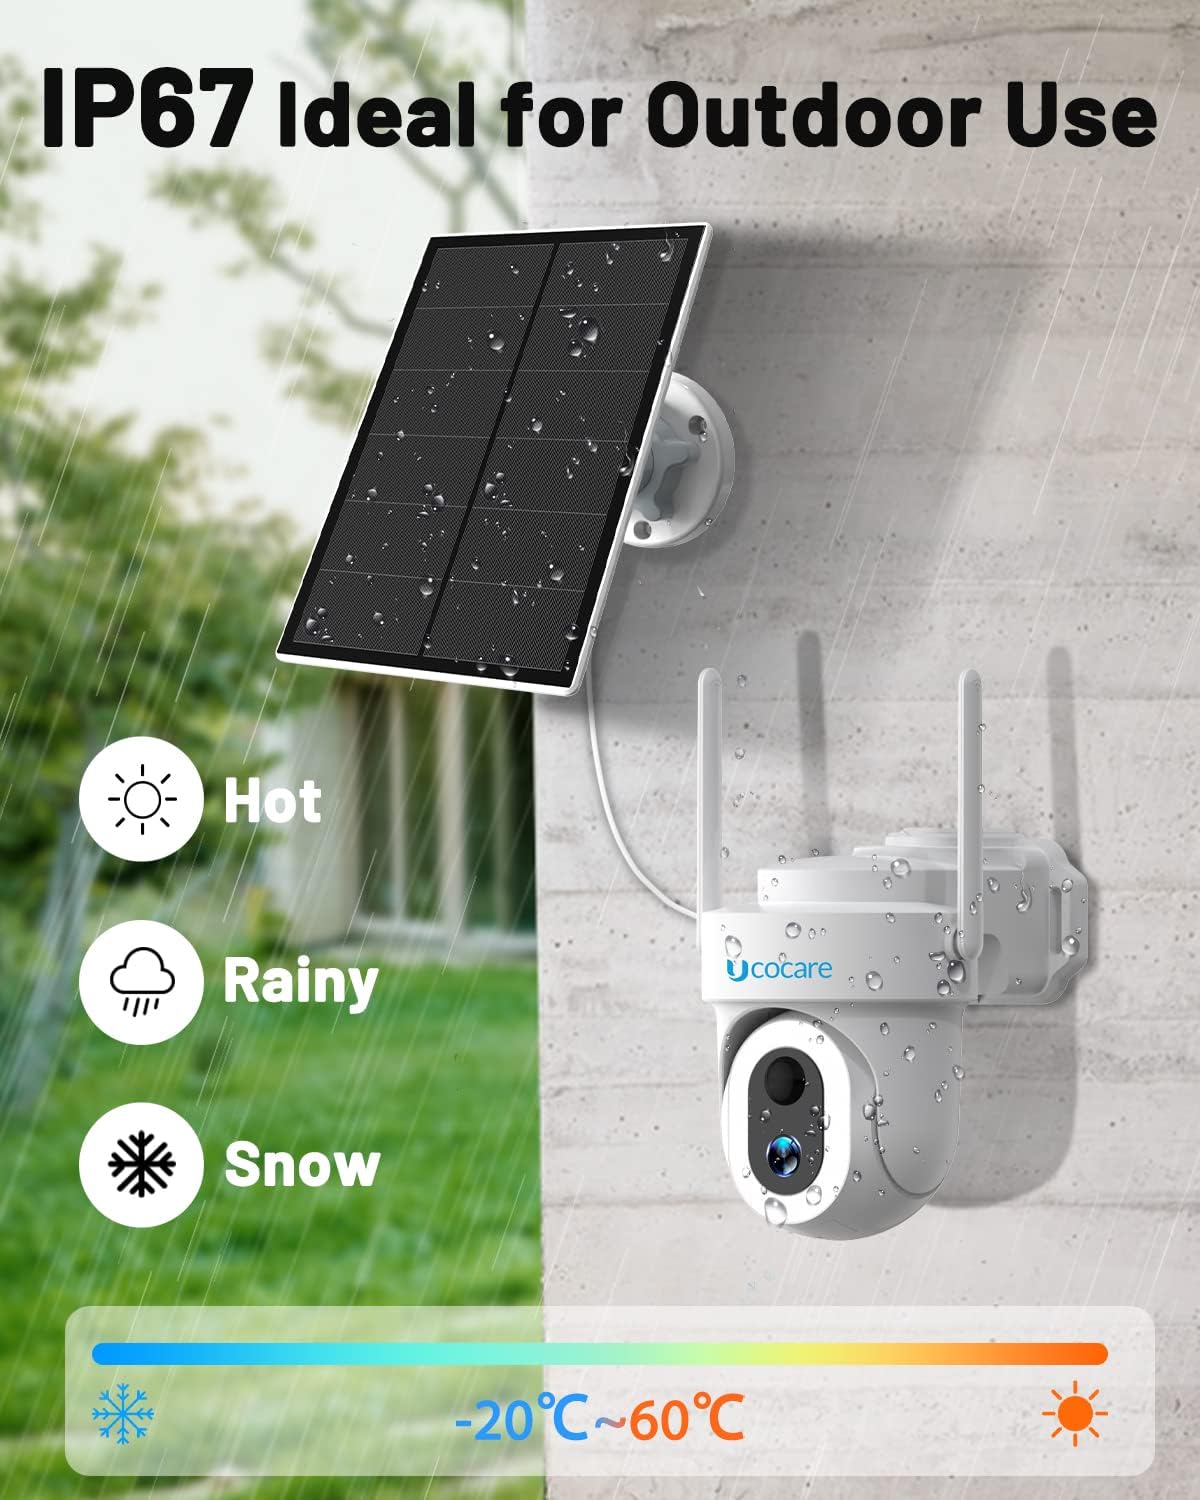 IP67 ideal for outdoor use, solar outdoor camera